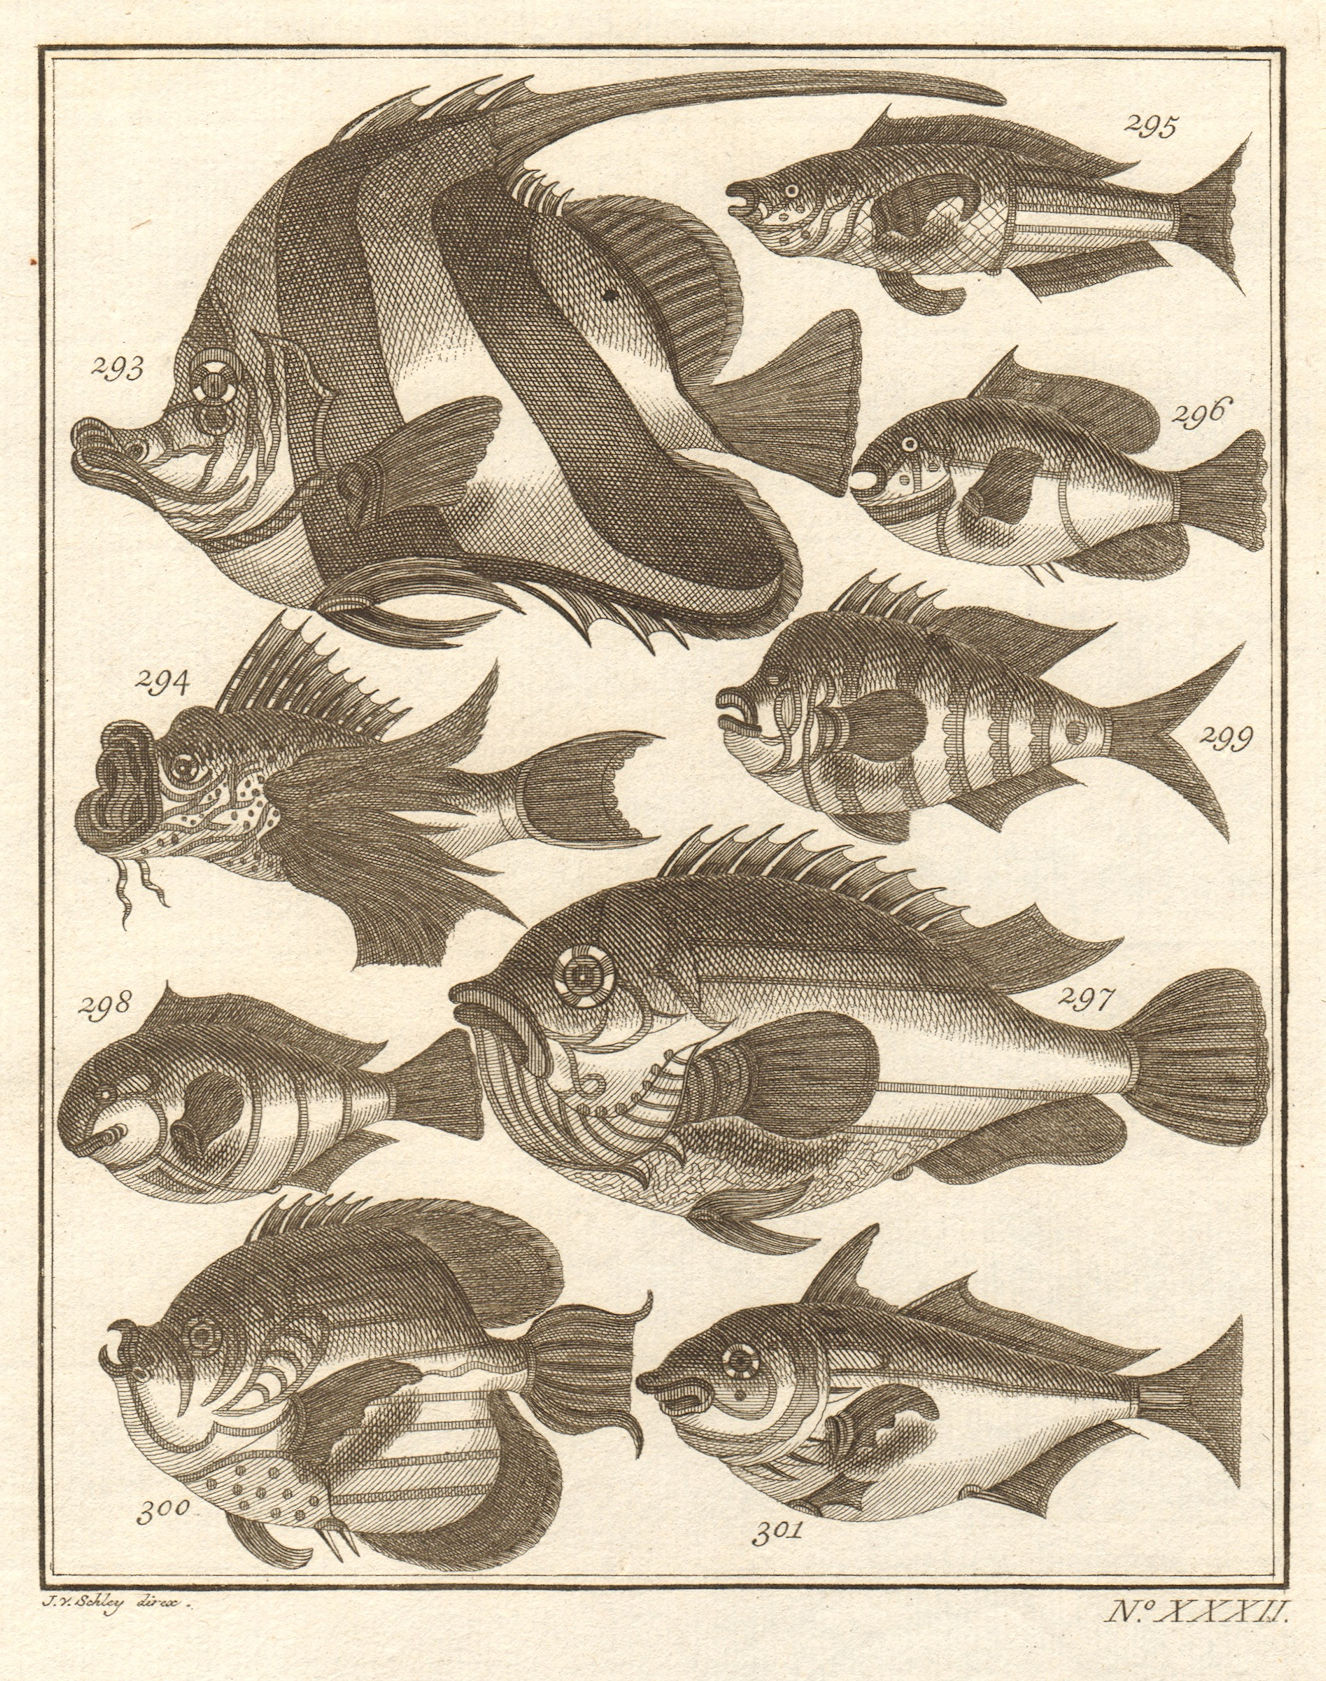 Associate Product XXXII. Poissons d'Ambione. Indonesia Moluccas Maluku tropical fish. SCHLEY 1763